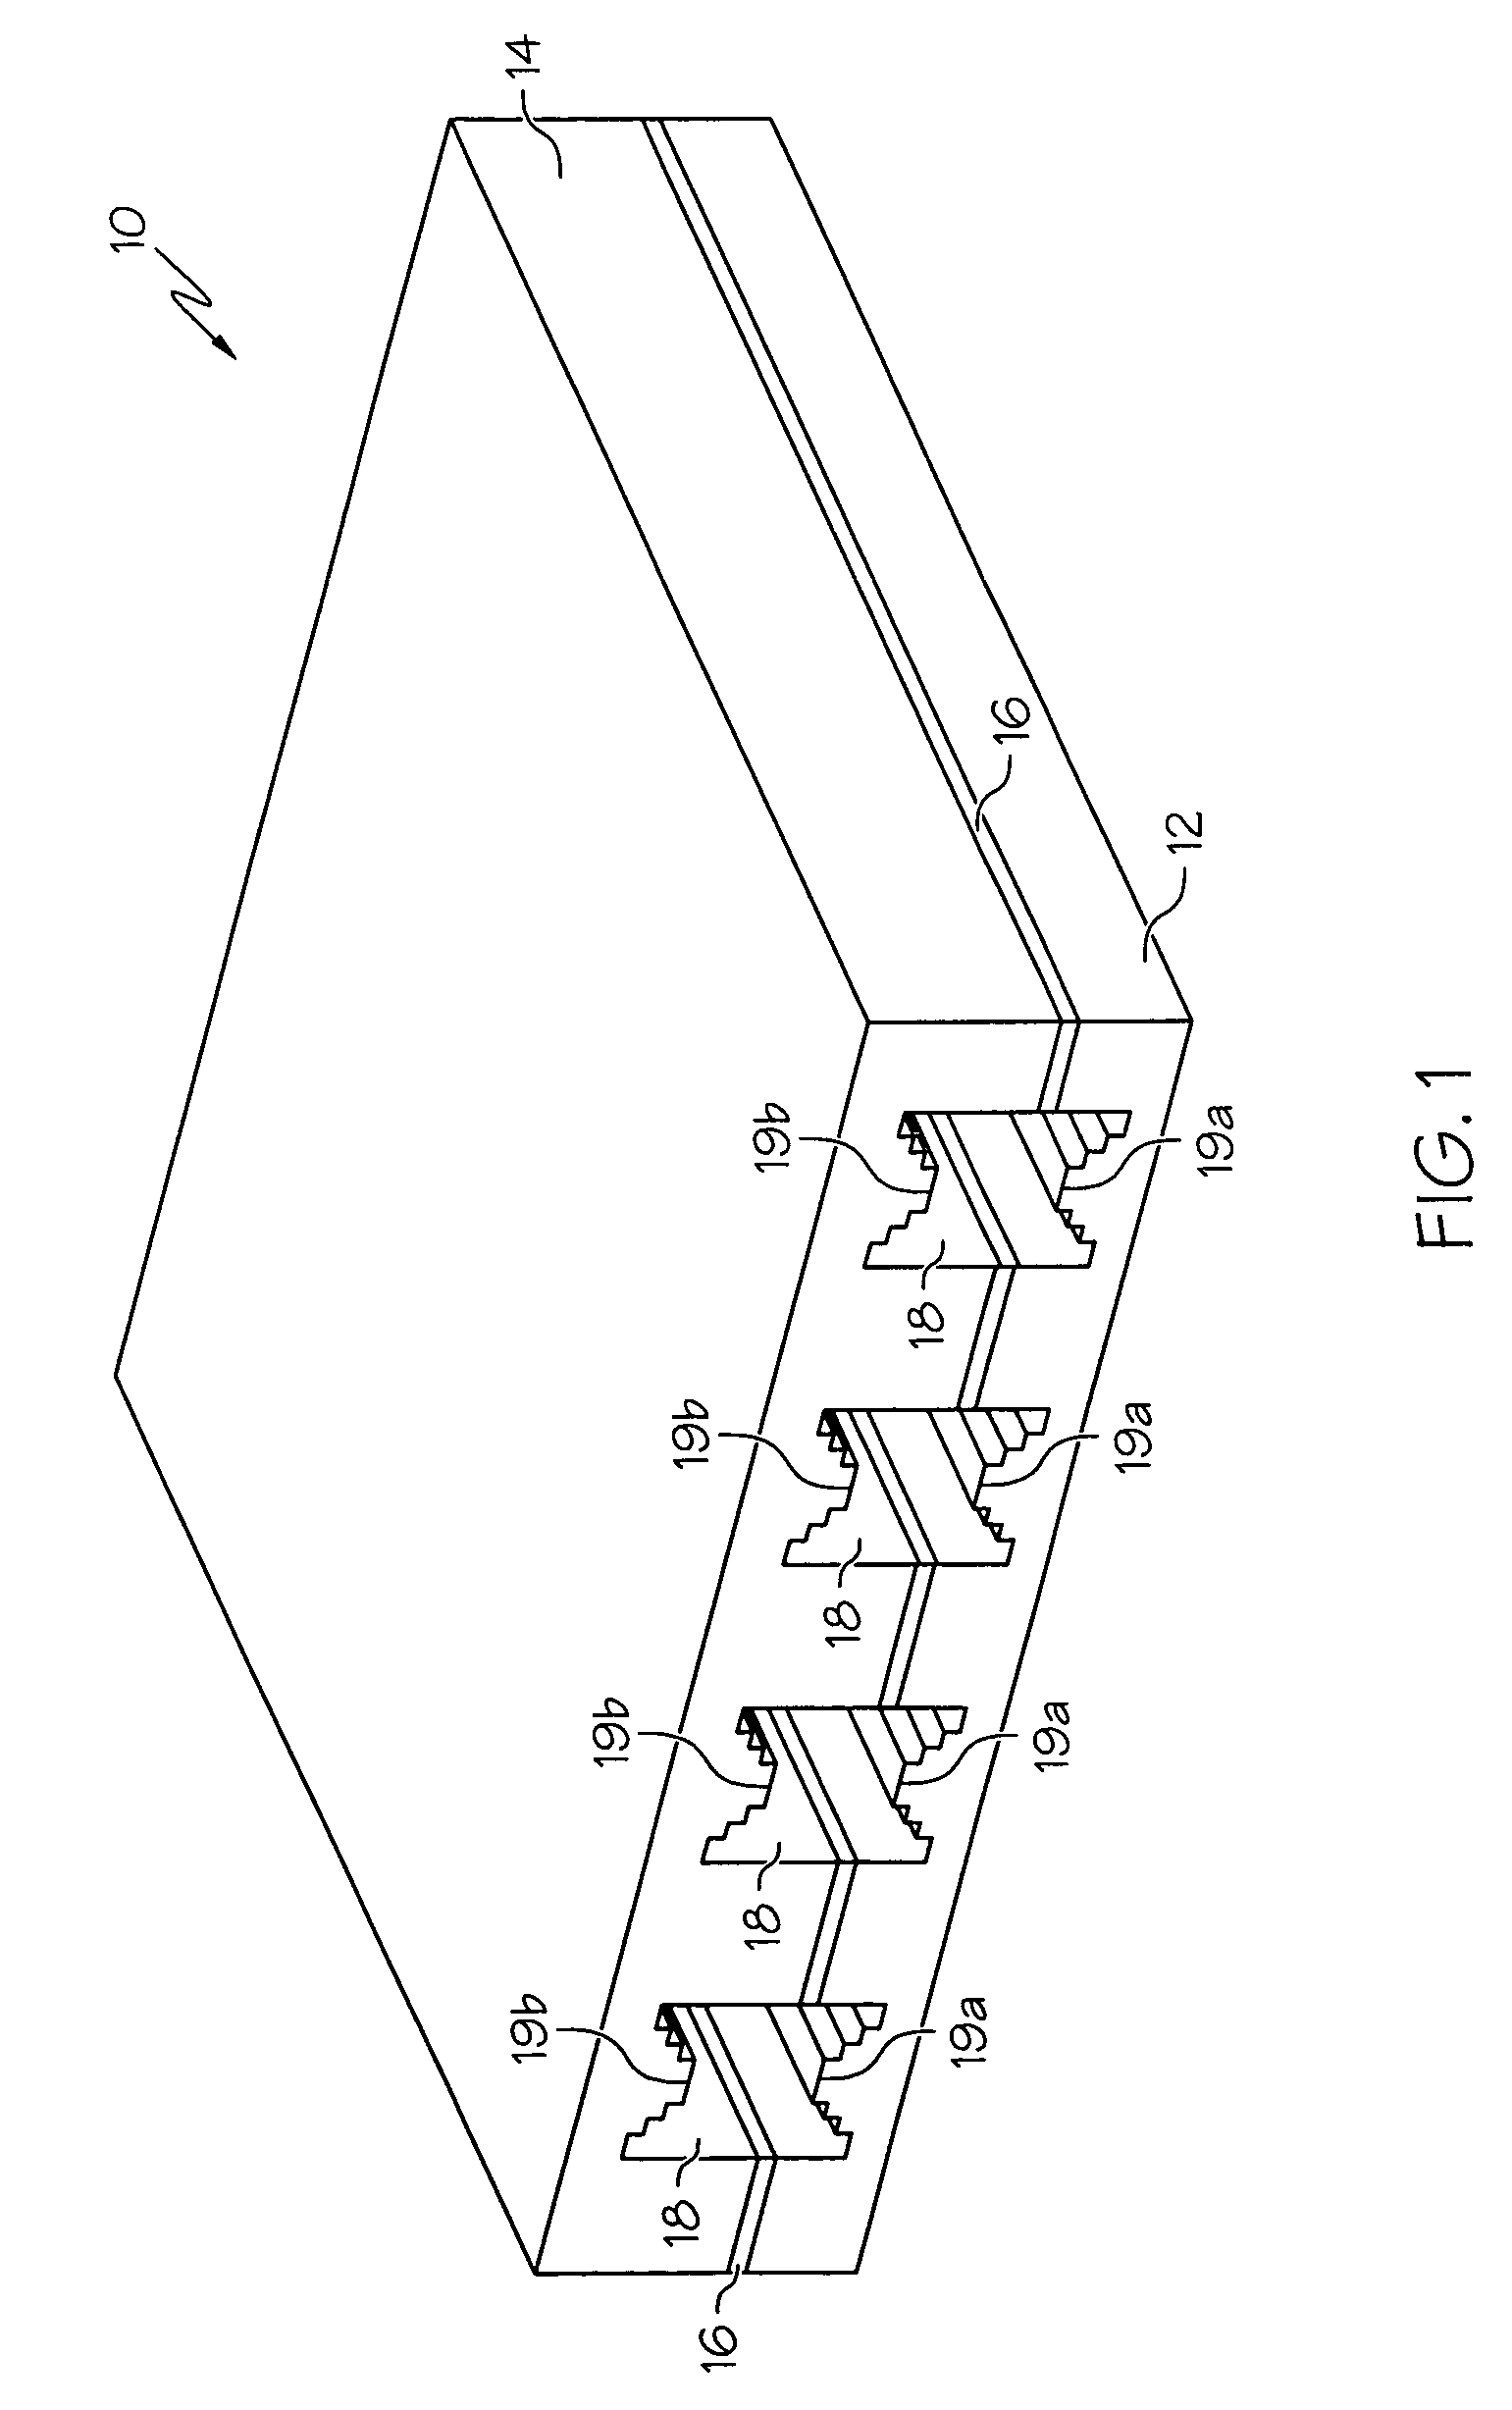 Heat-dissipating component having stair-stepped coolant channels